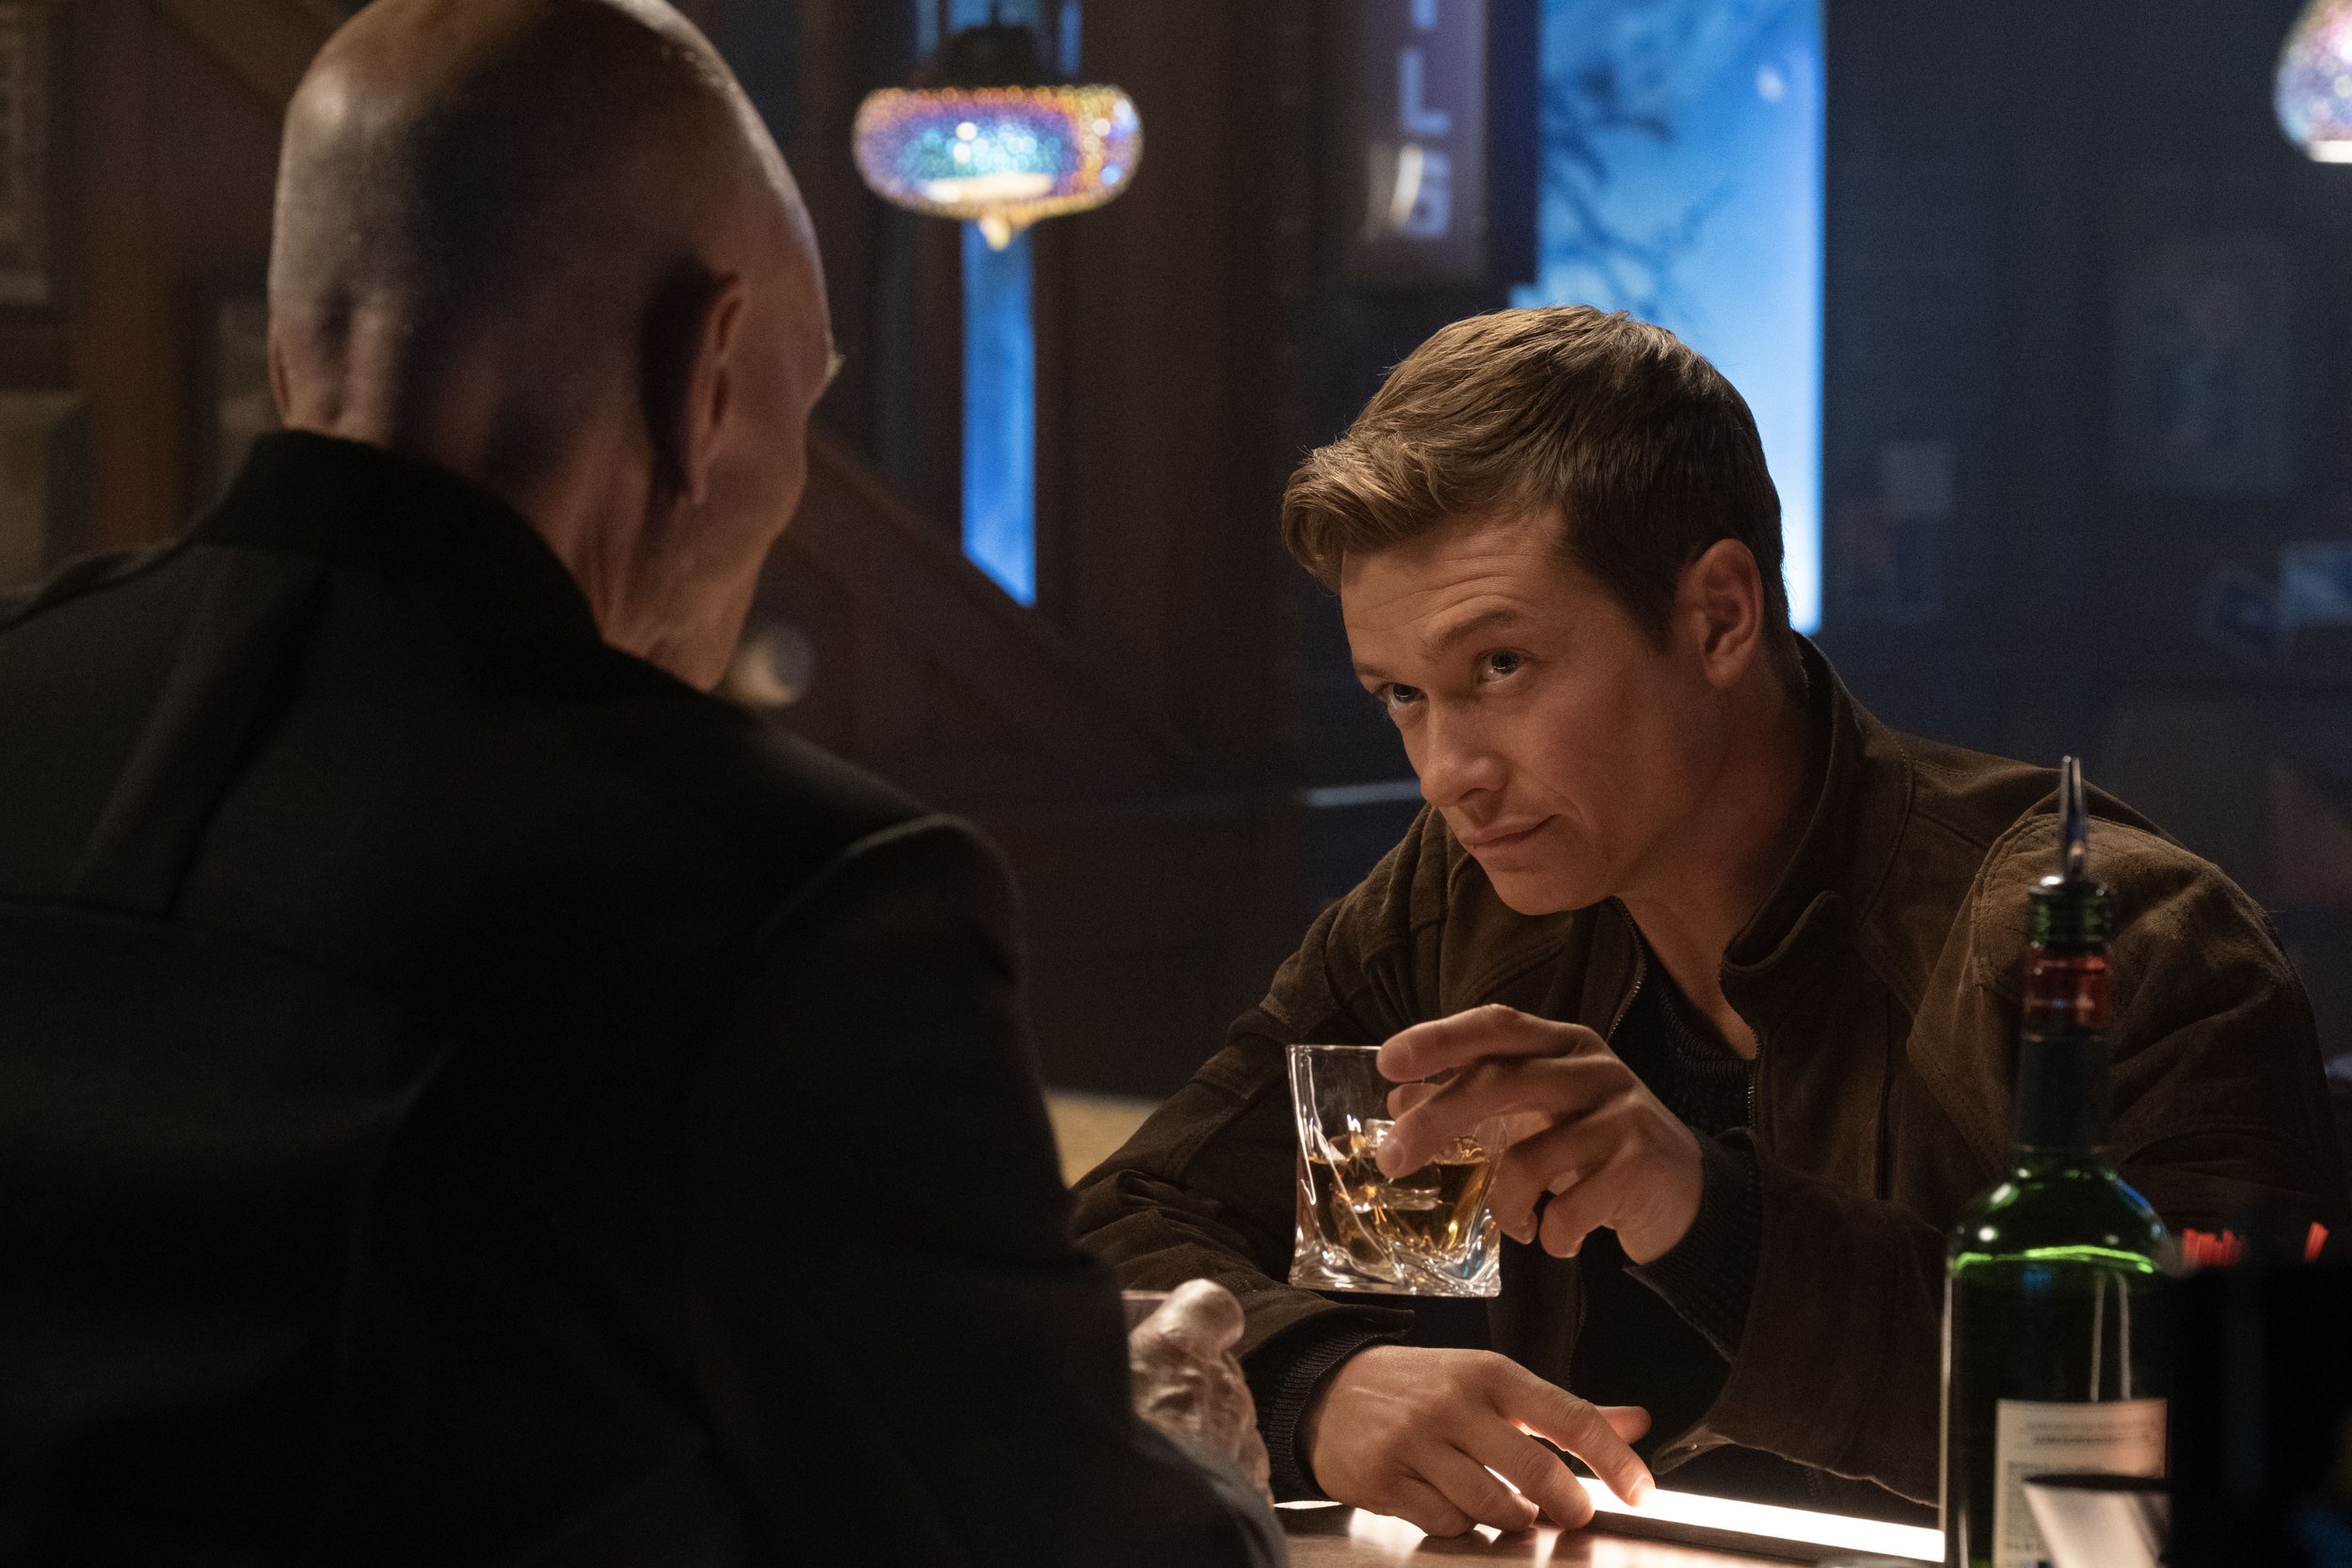   Patrick Stewart  as Picard and  Ed Speleers  as Jack Crusher.  Photo Credit: Trae Patton/Paramount+.  